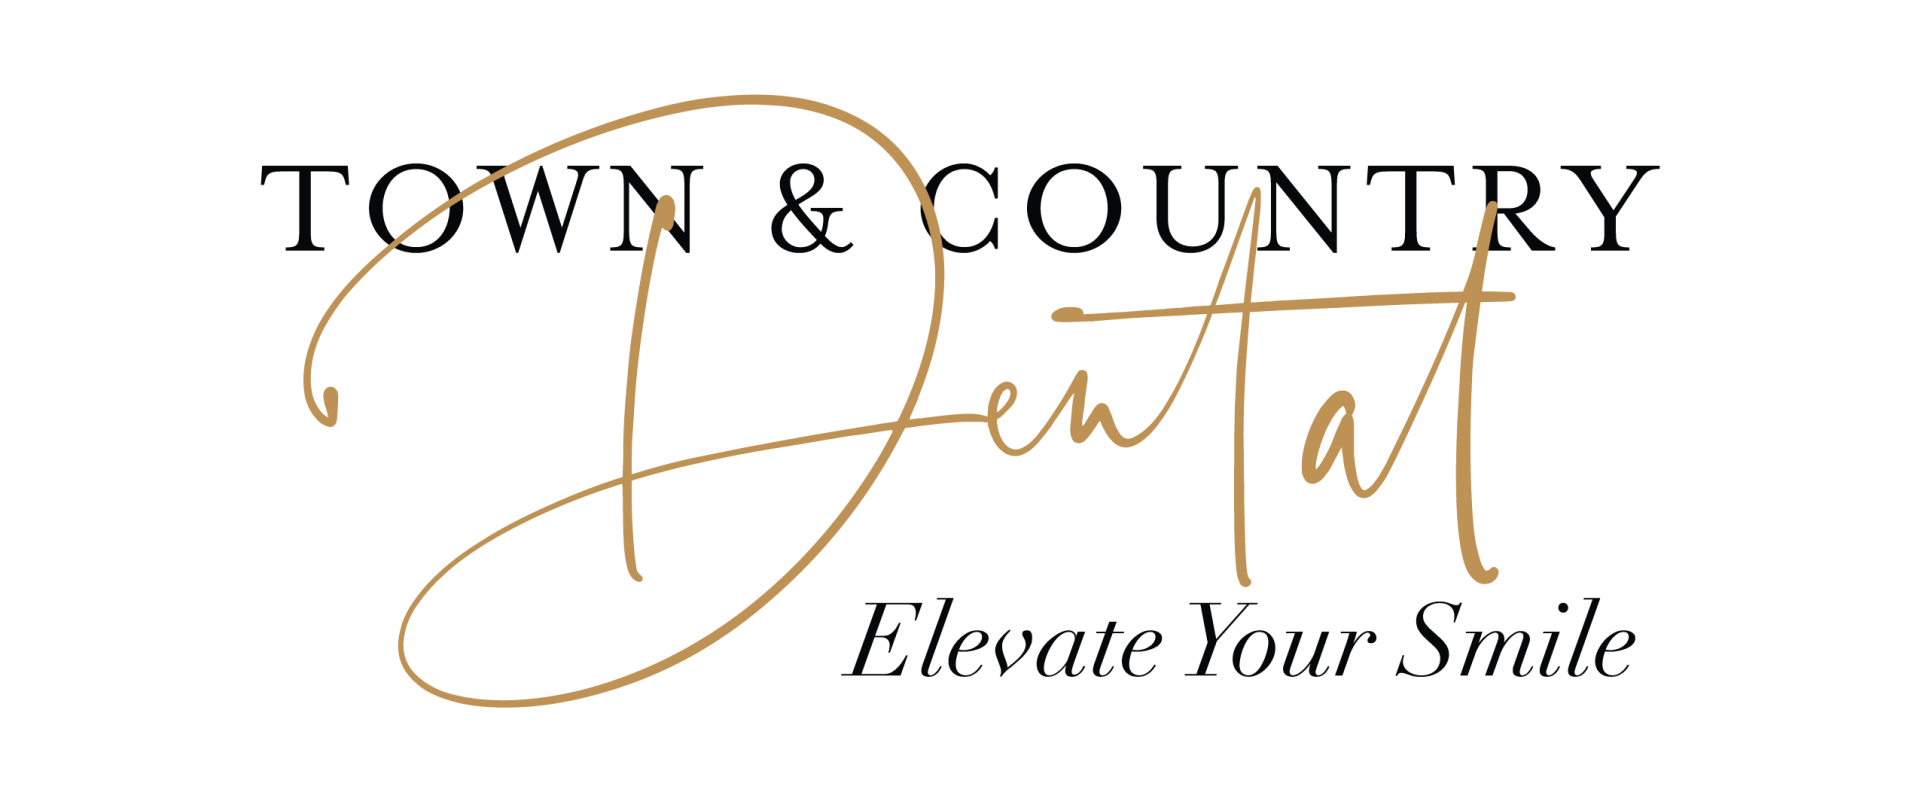 Town & Country Dental